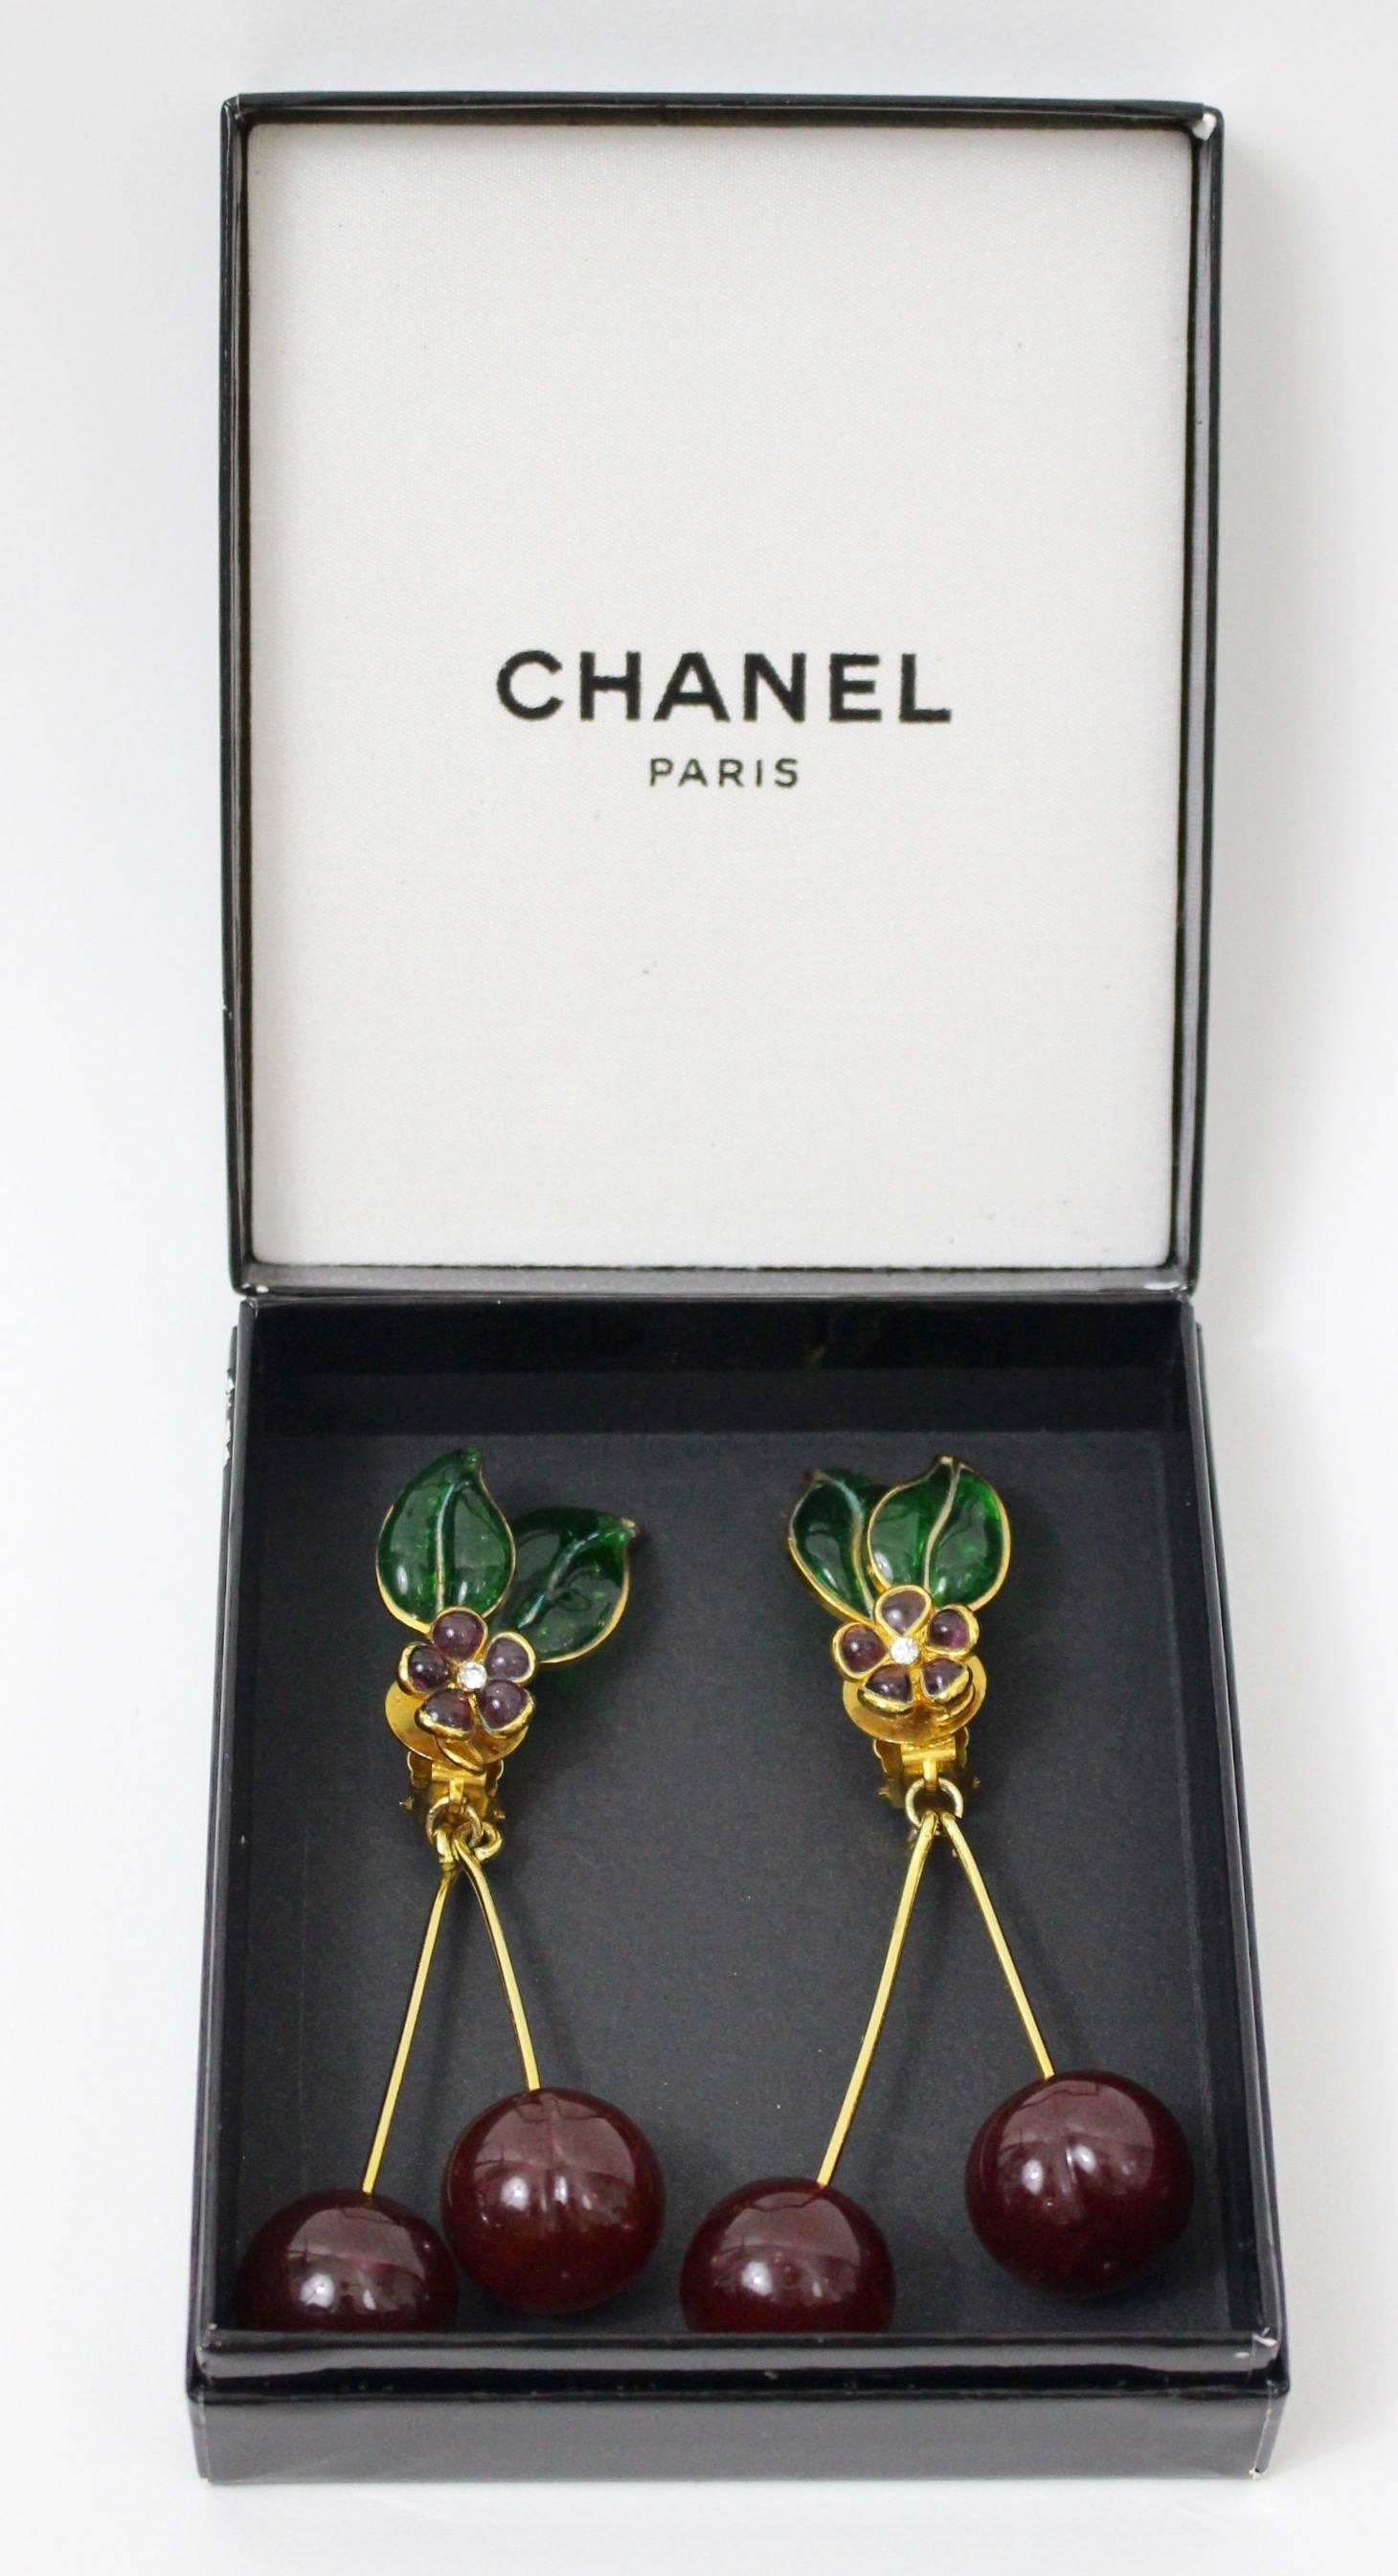 A magnificent pair of  Pate de Verre cherry earrings by Maison Gripoix for Chanel. Emerald green hand poured glass leaves and gold toned veins. Amethyst glass flowers with crystal paste centers and long dangling glass cherries.
These very rare